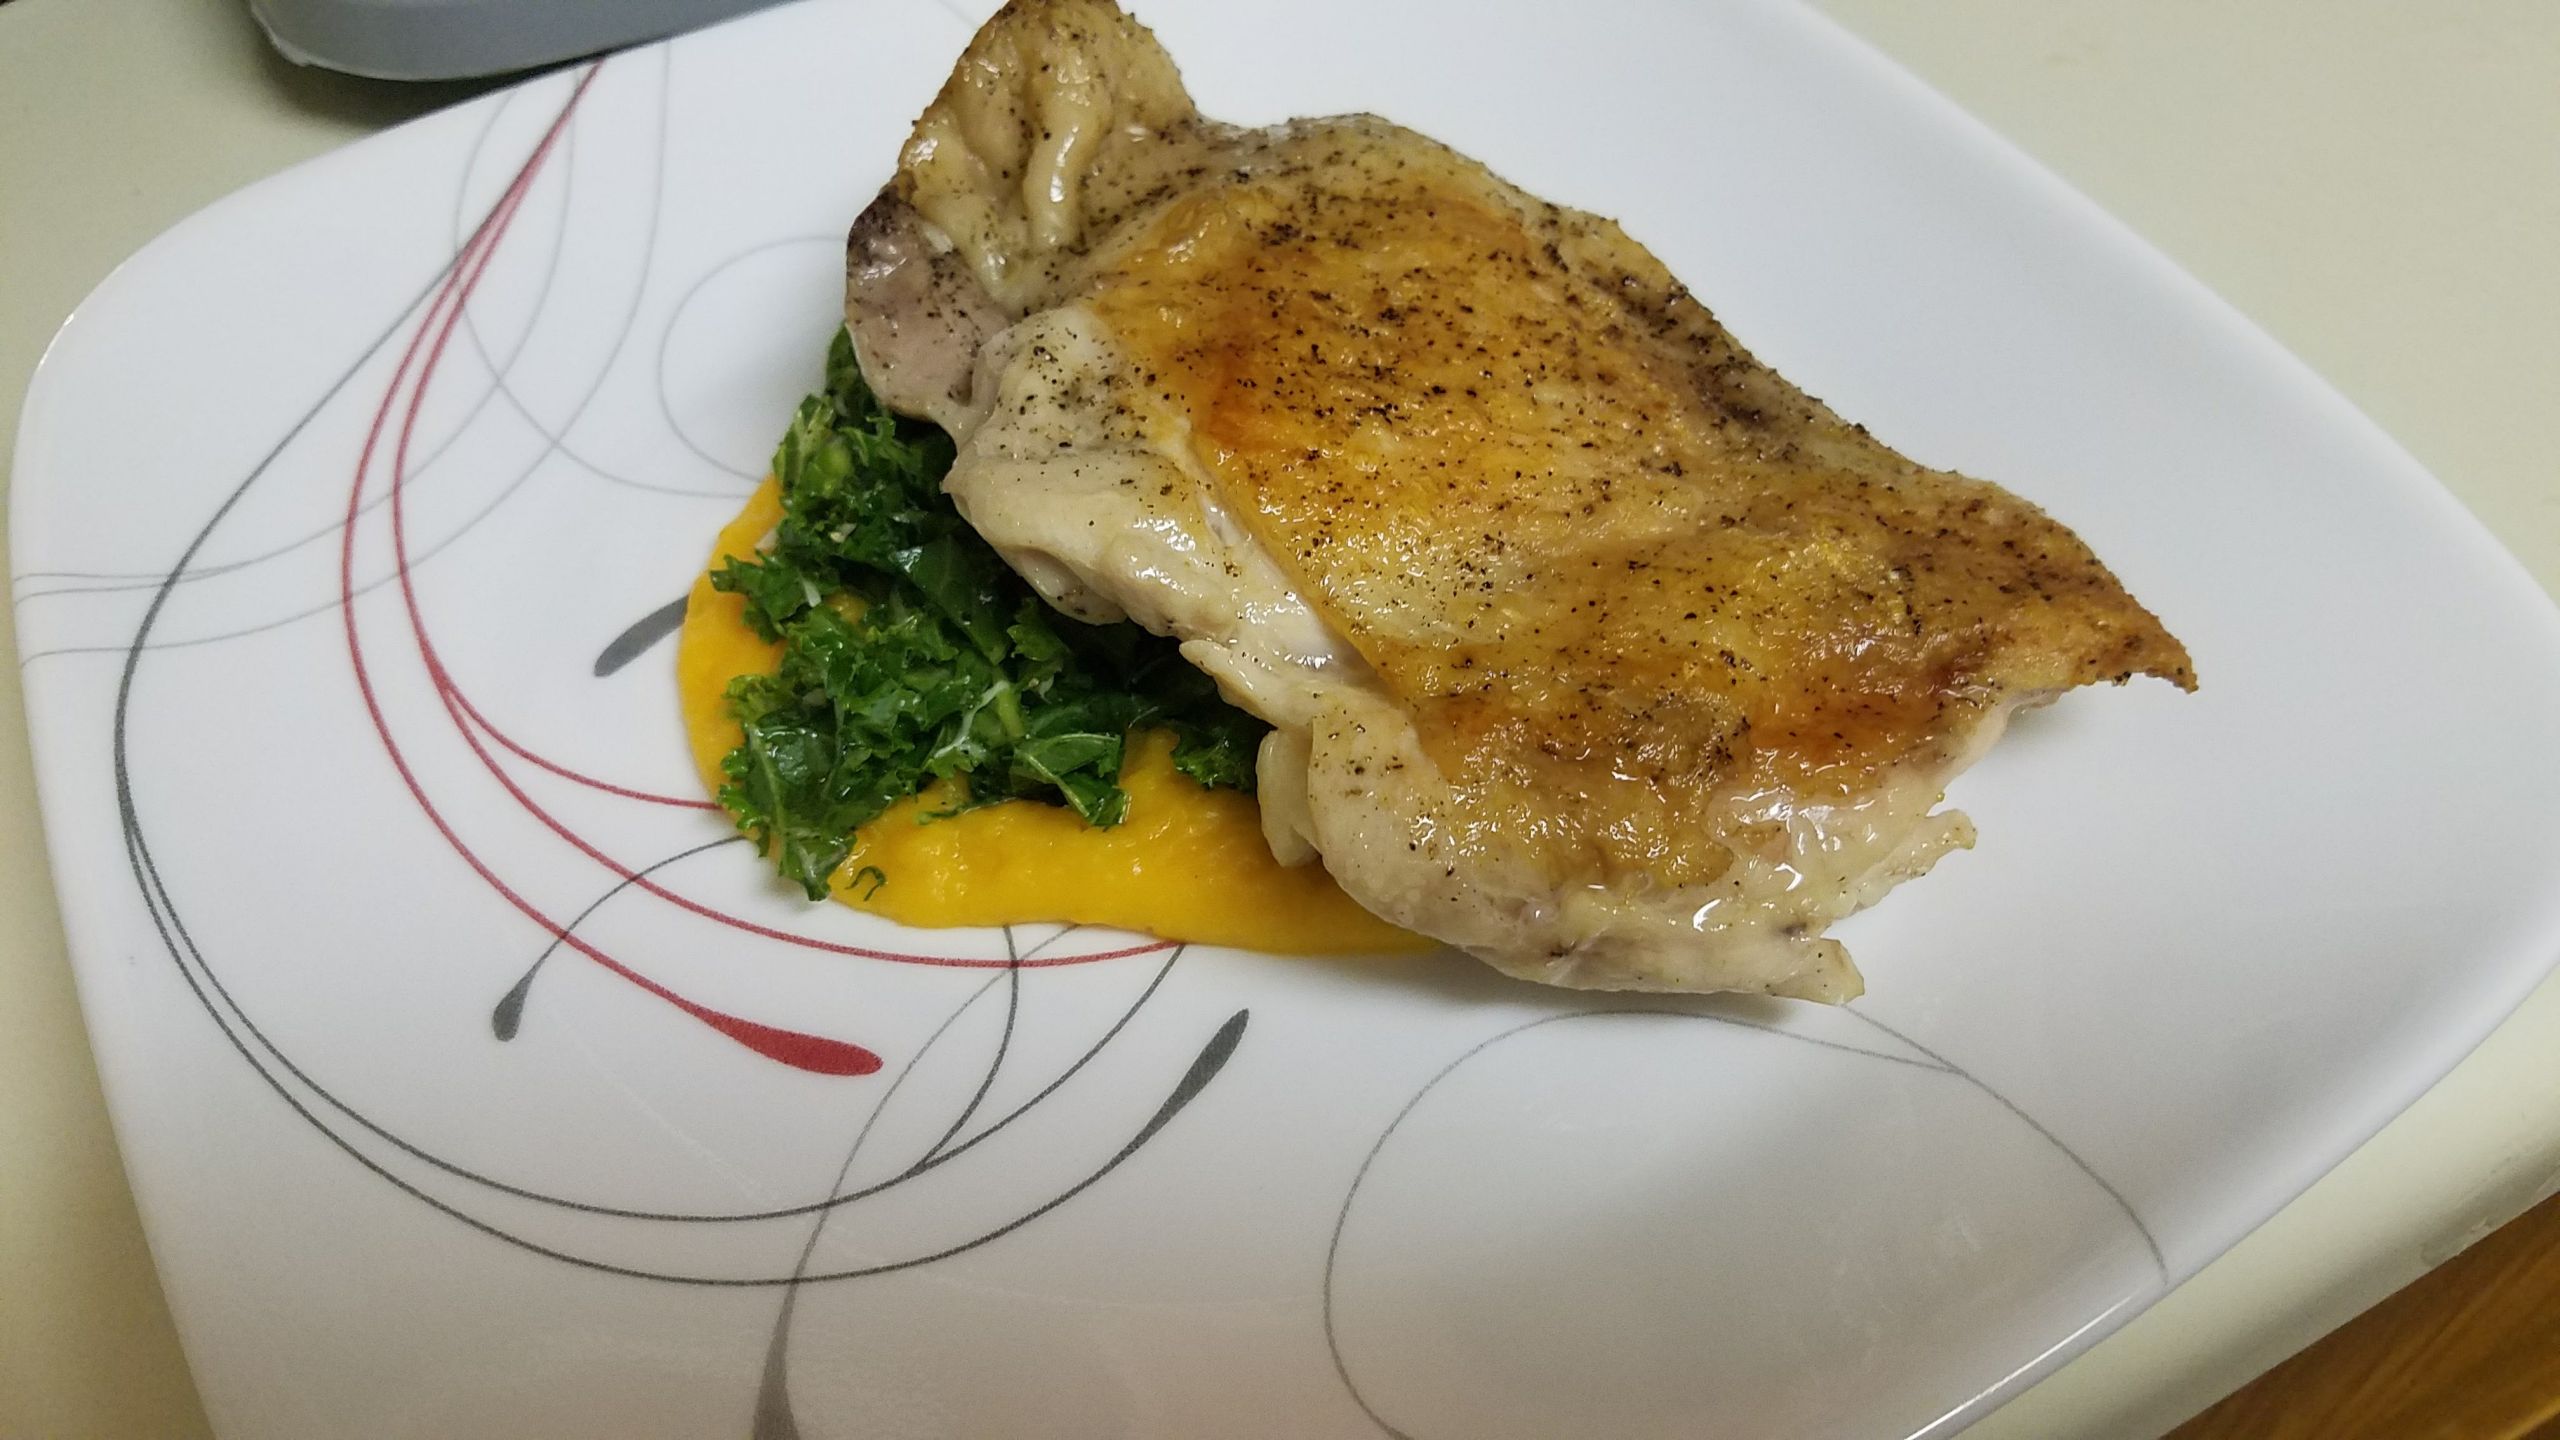 Sous Vide Chicken Thighs Chefsteps
 Crispy Chicken Thighs Made Simple With Sous Vide